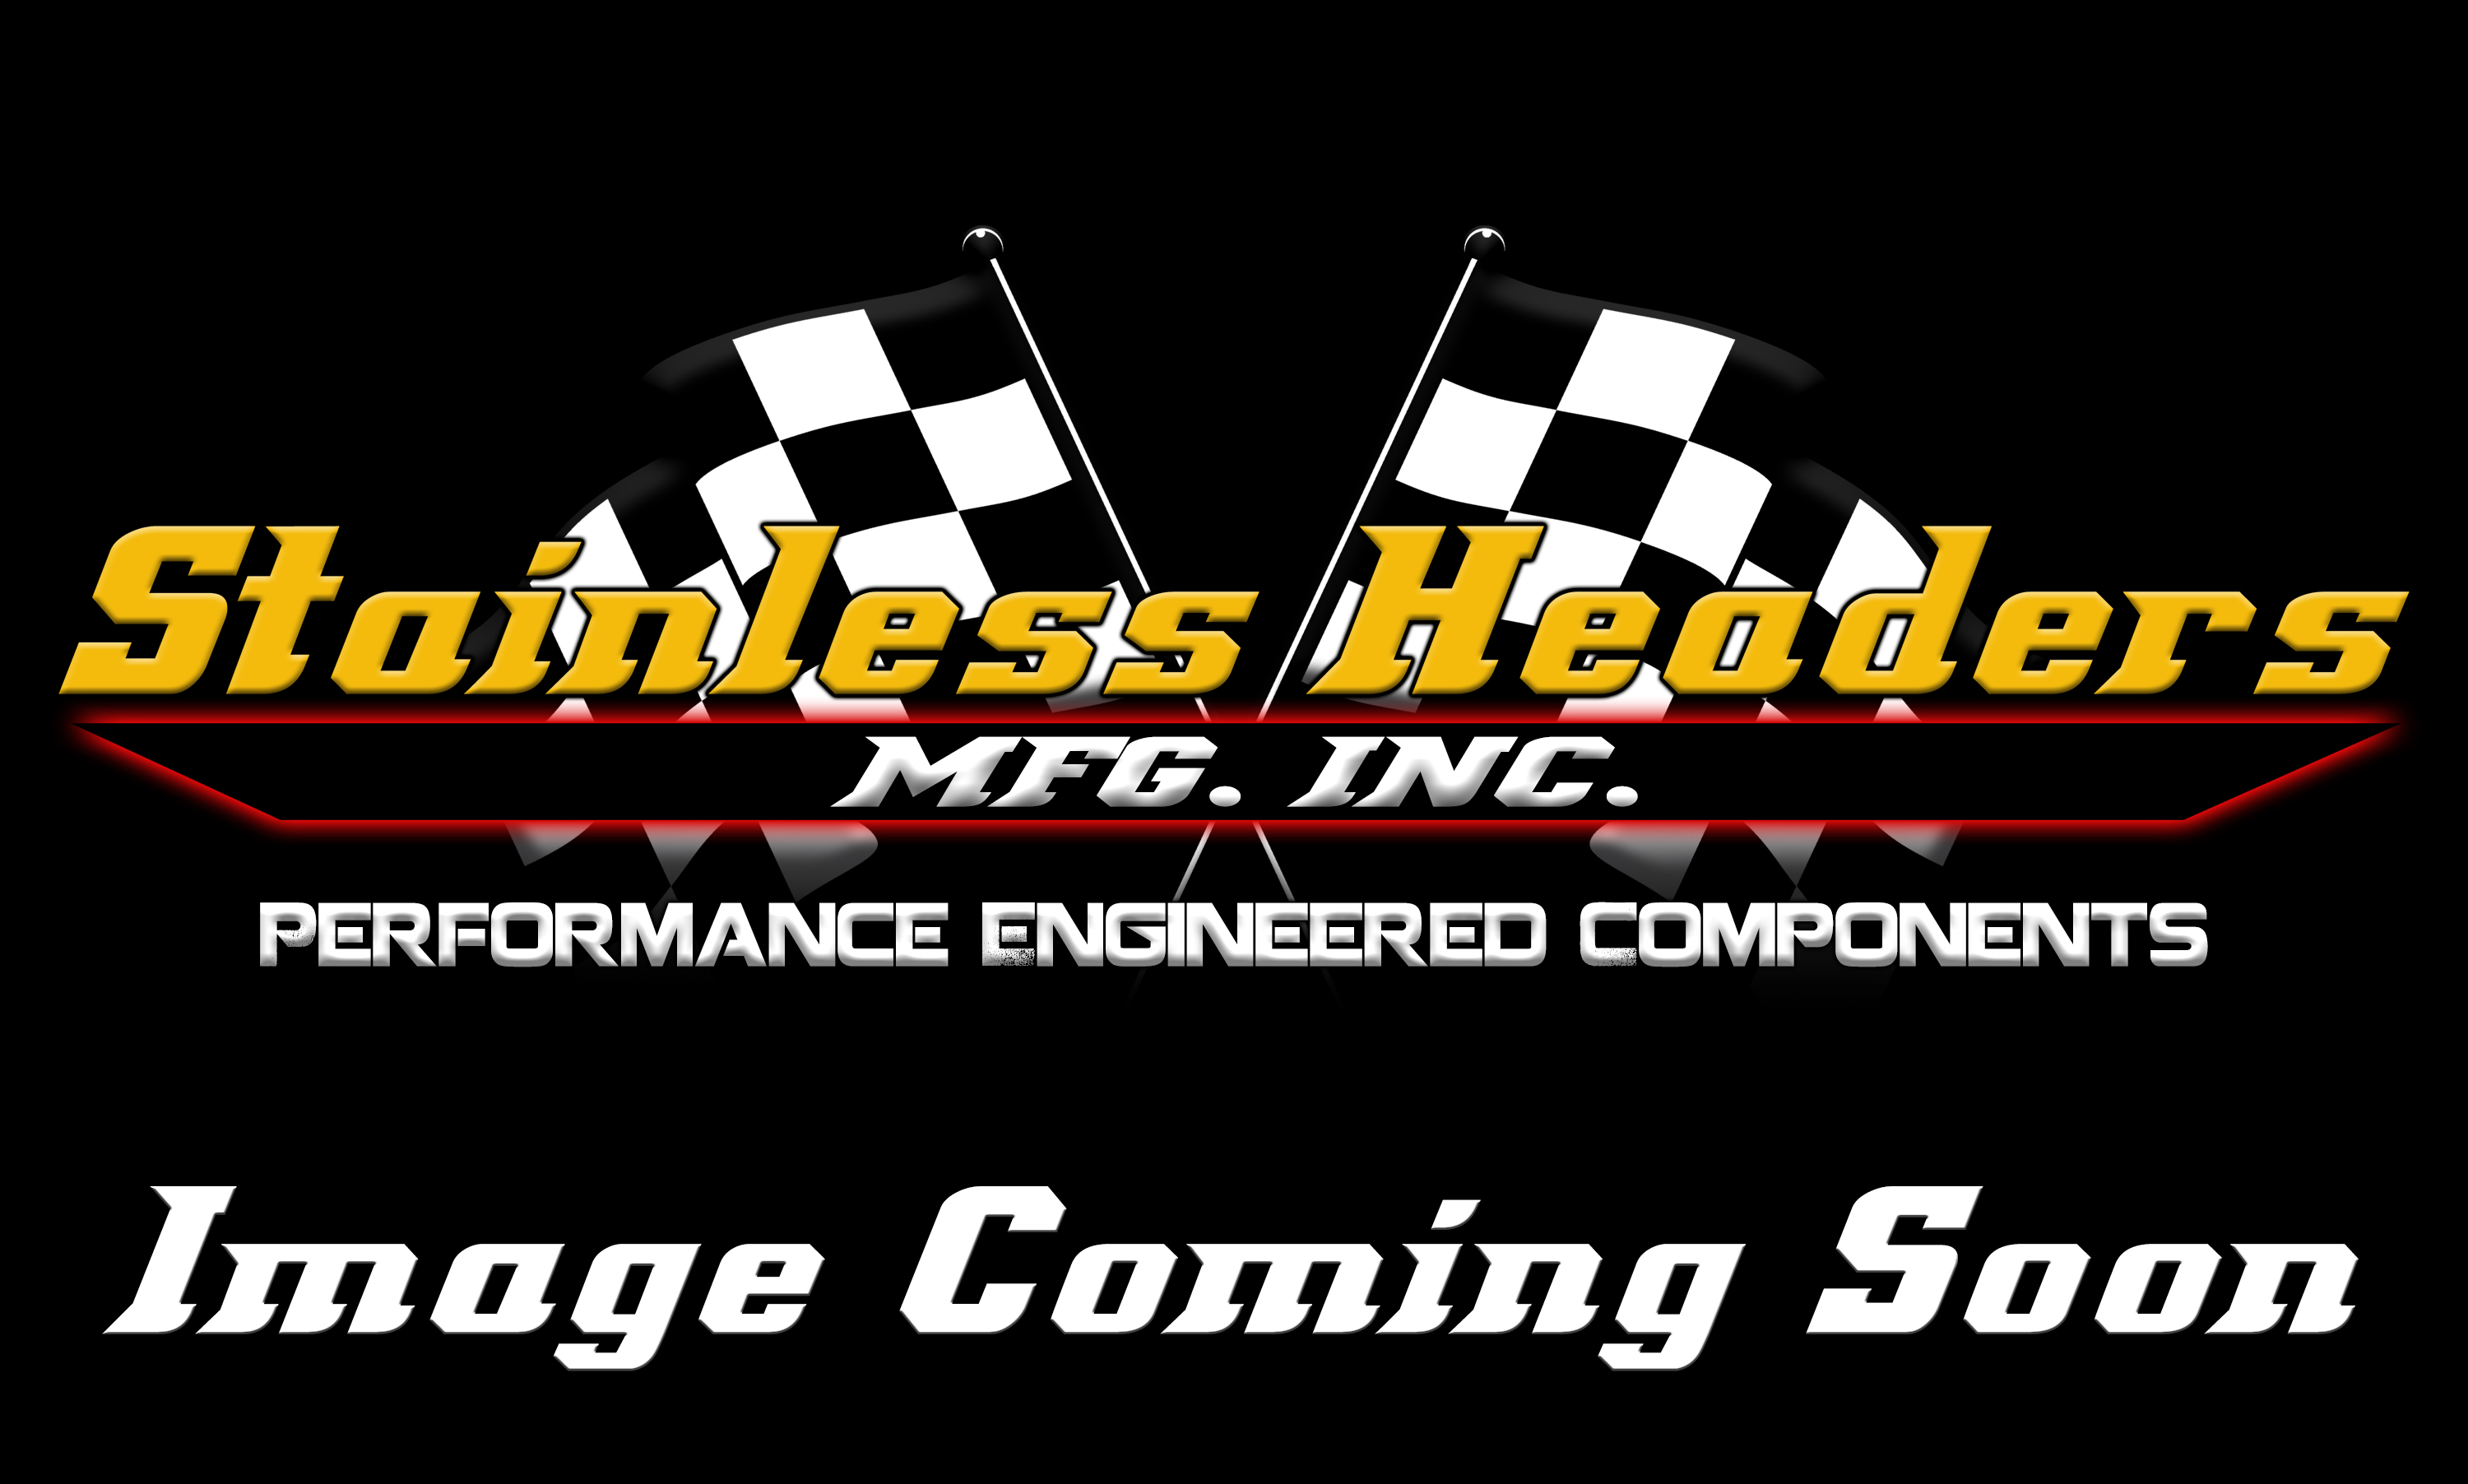 CompTurbo Technologies - CTR4276R-7685 Mid Frame Oil Lubricated 2.0 Turbocharger (1320 HP) - Image 3